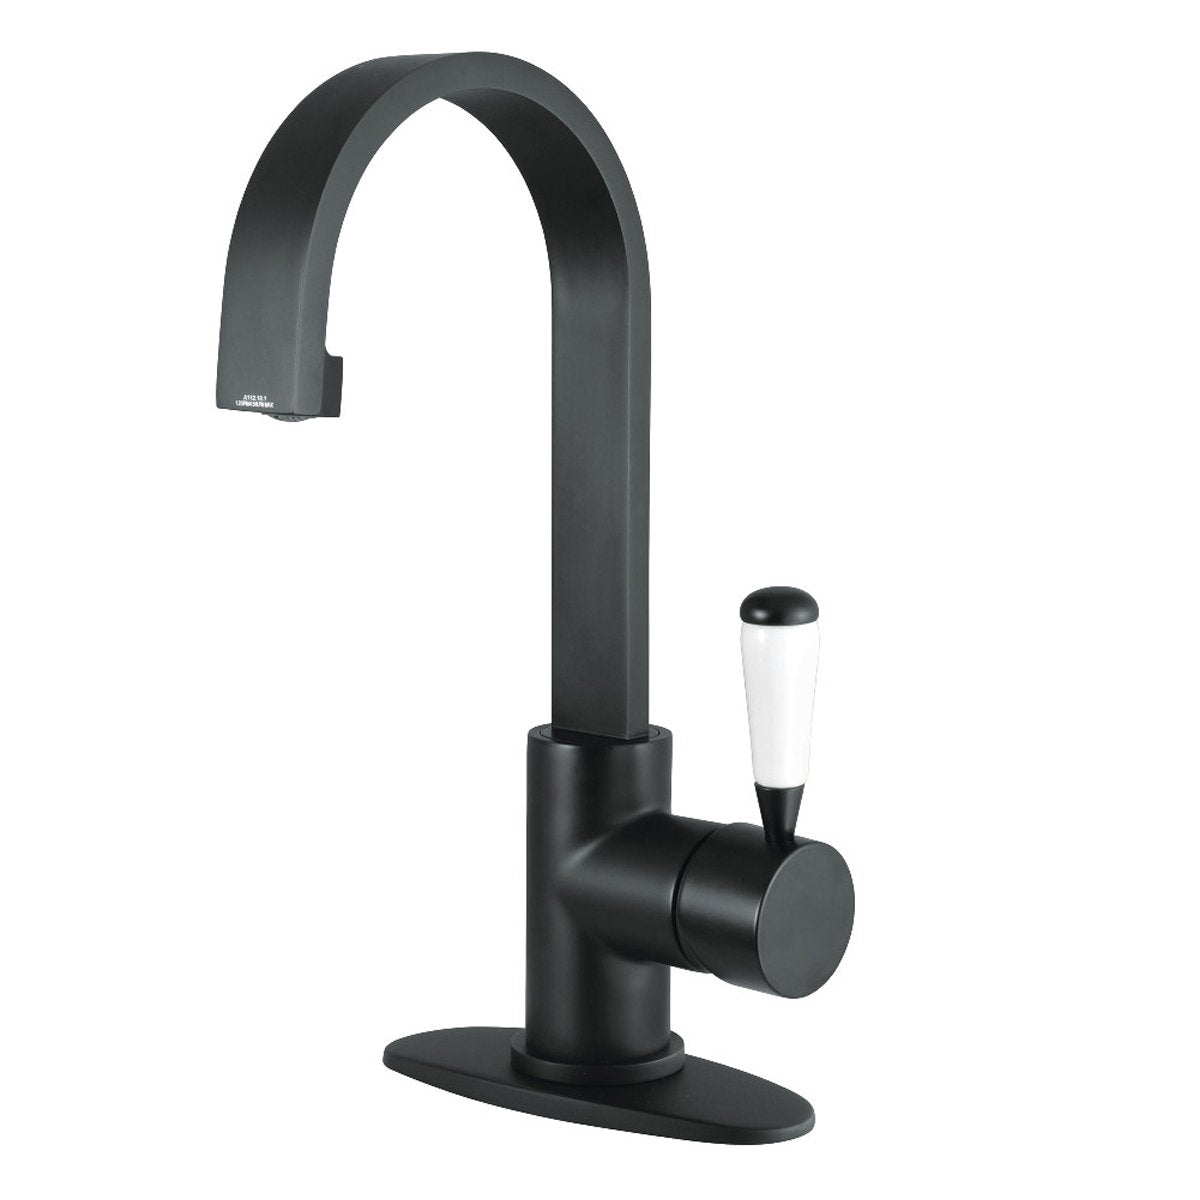 Kingston Brass Fauceture Paris Single-Handle Bathroom Faucet with Deck Plate and Drain